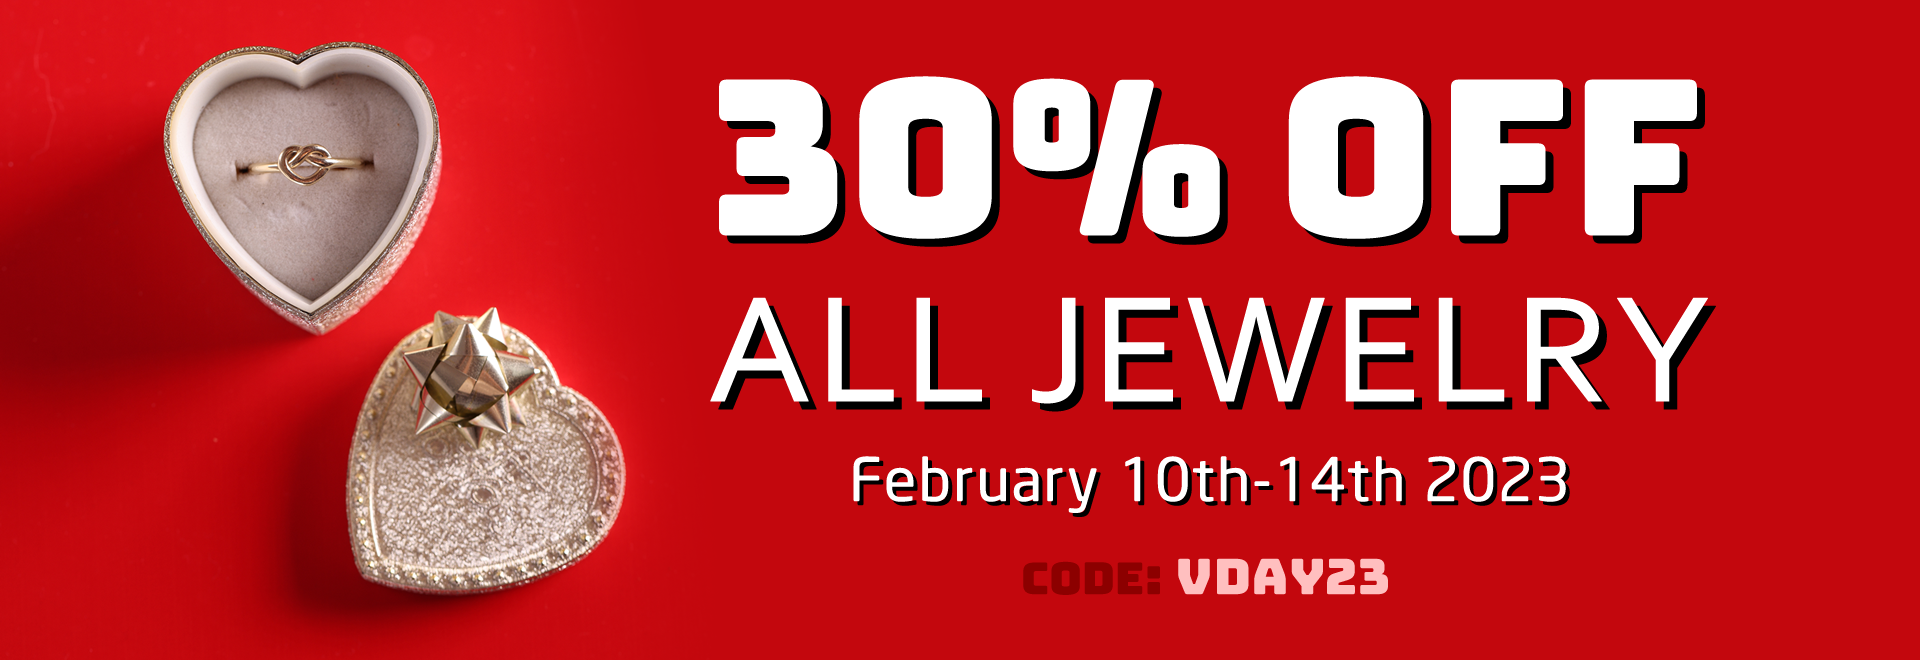 30% off all jewelry February 10th - 14th 2023 code: VDAY23